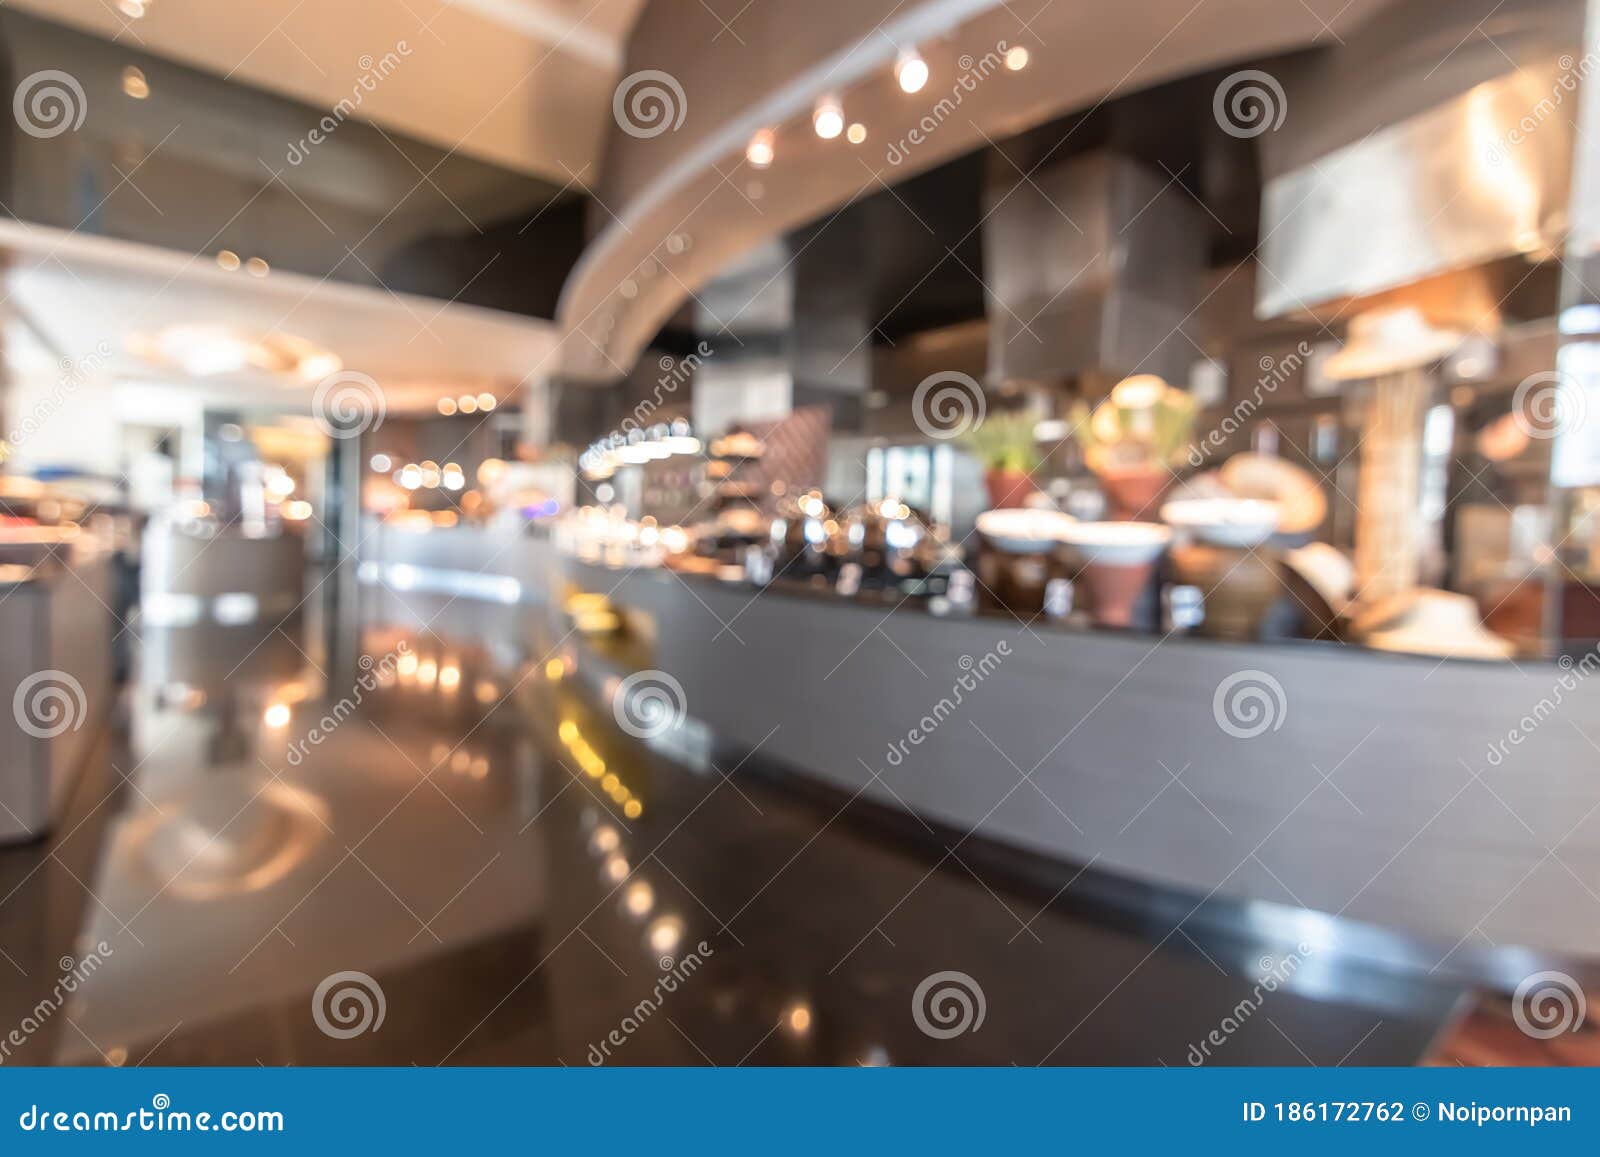 restaurant open kitchen blur background in luxury hotel showing chef cooking over blurry food counter for buffet catering service